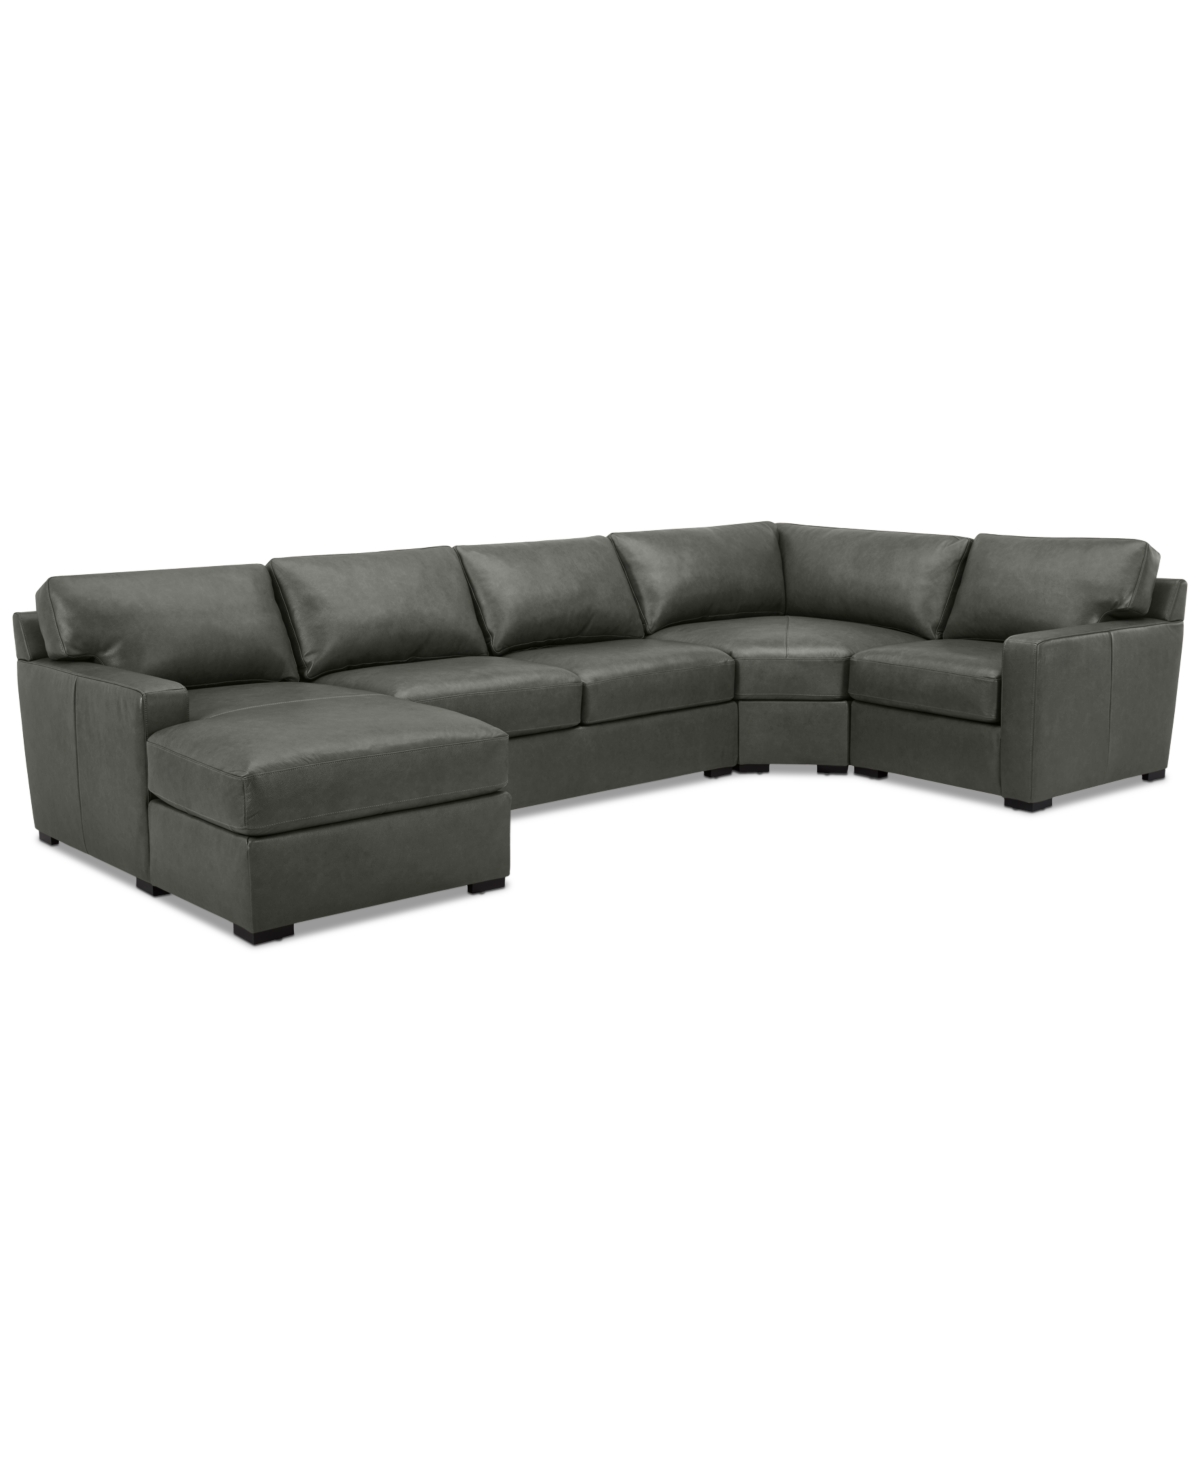 Macy's Radley 148" 4-pc. Leather Wedge Modular Chaise Sectional, Created For  In Anthracite